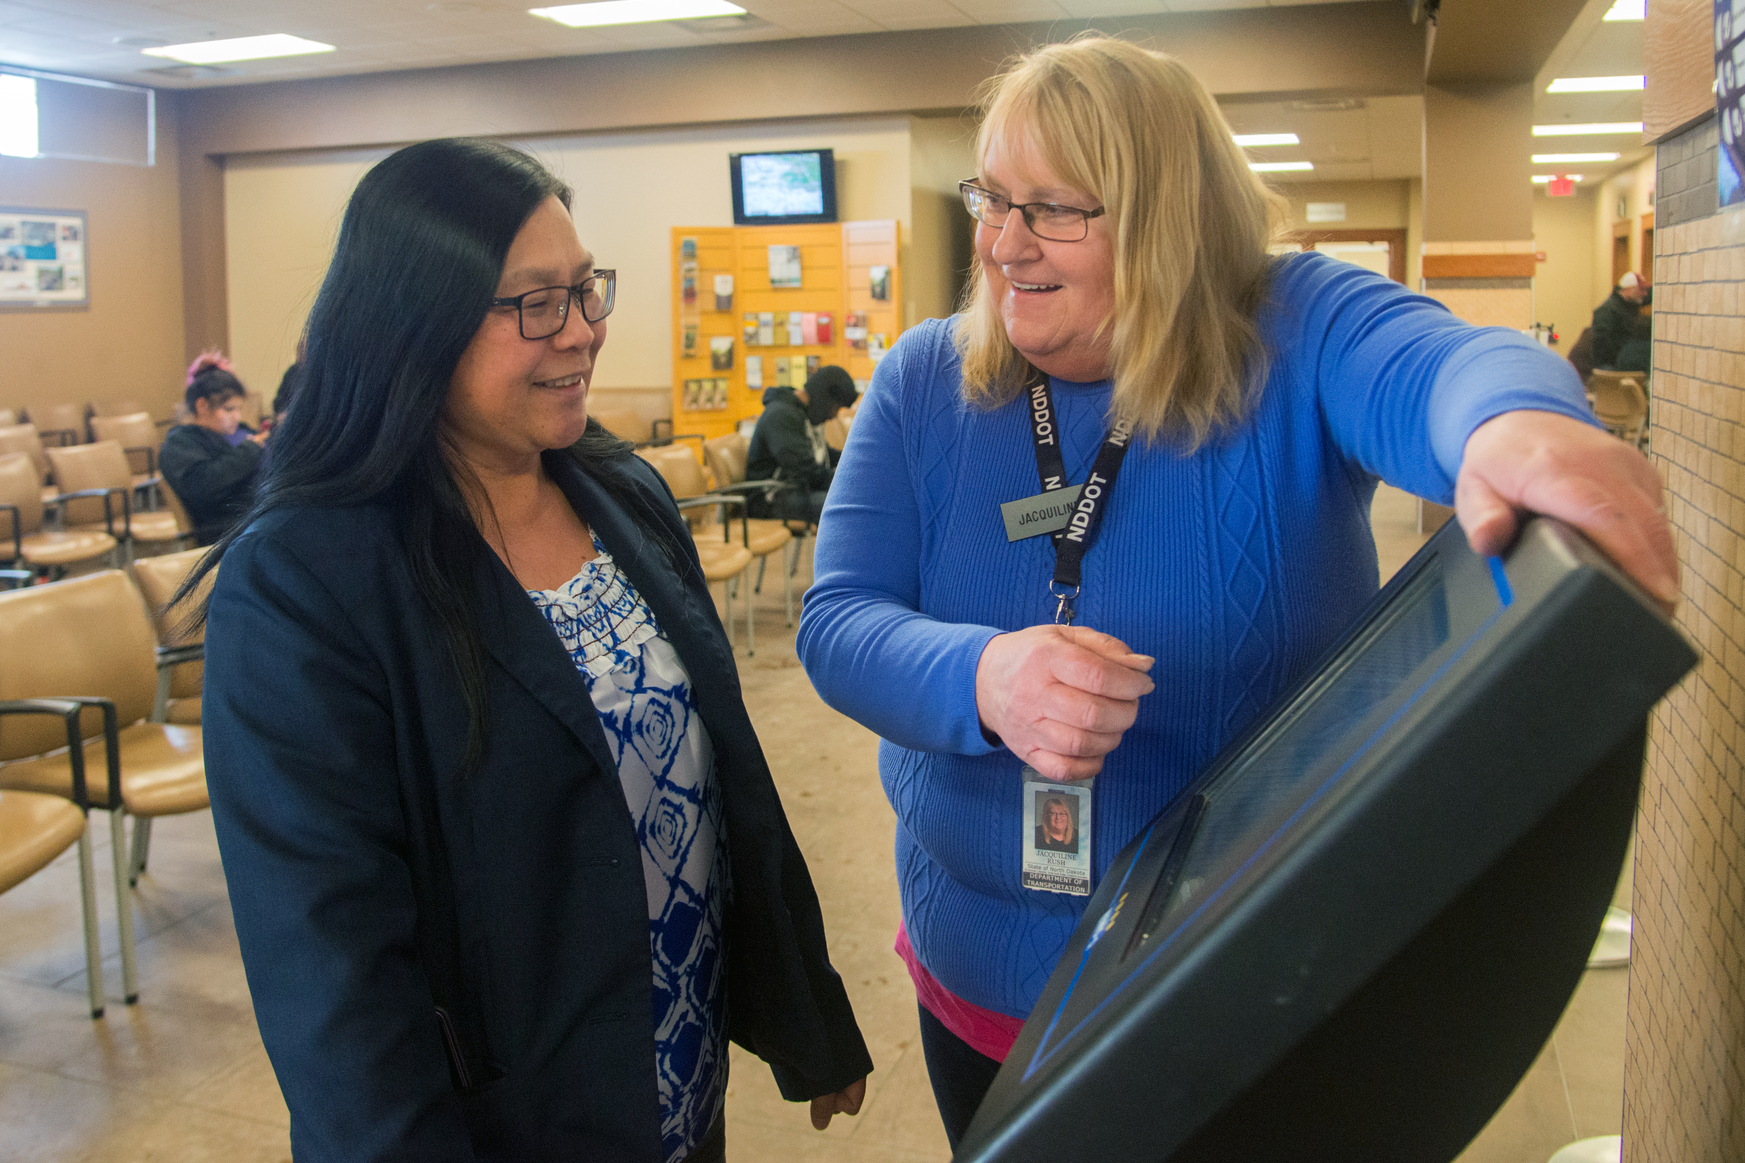 NDDOT employee helps woman renew her tags at a kiosk.